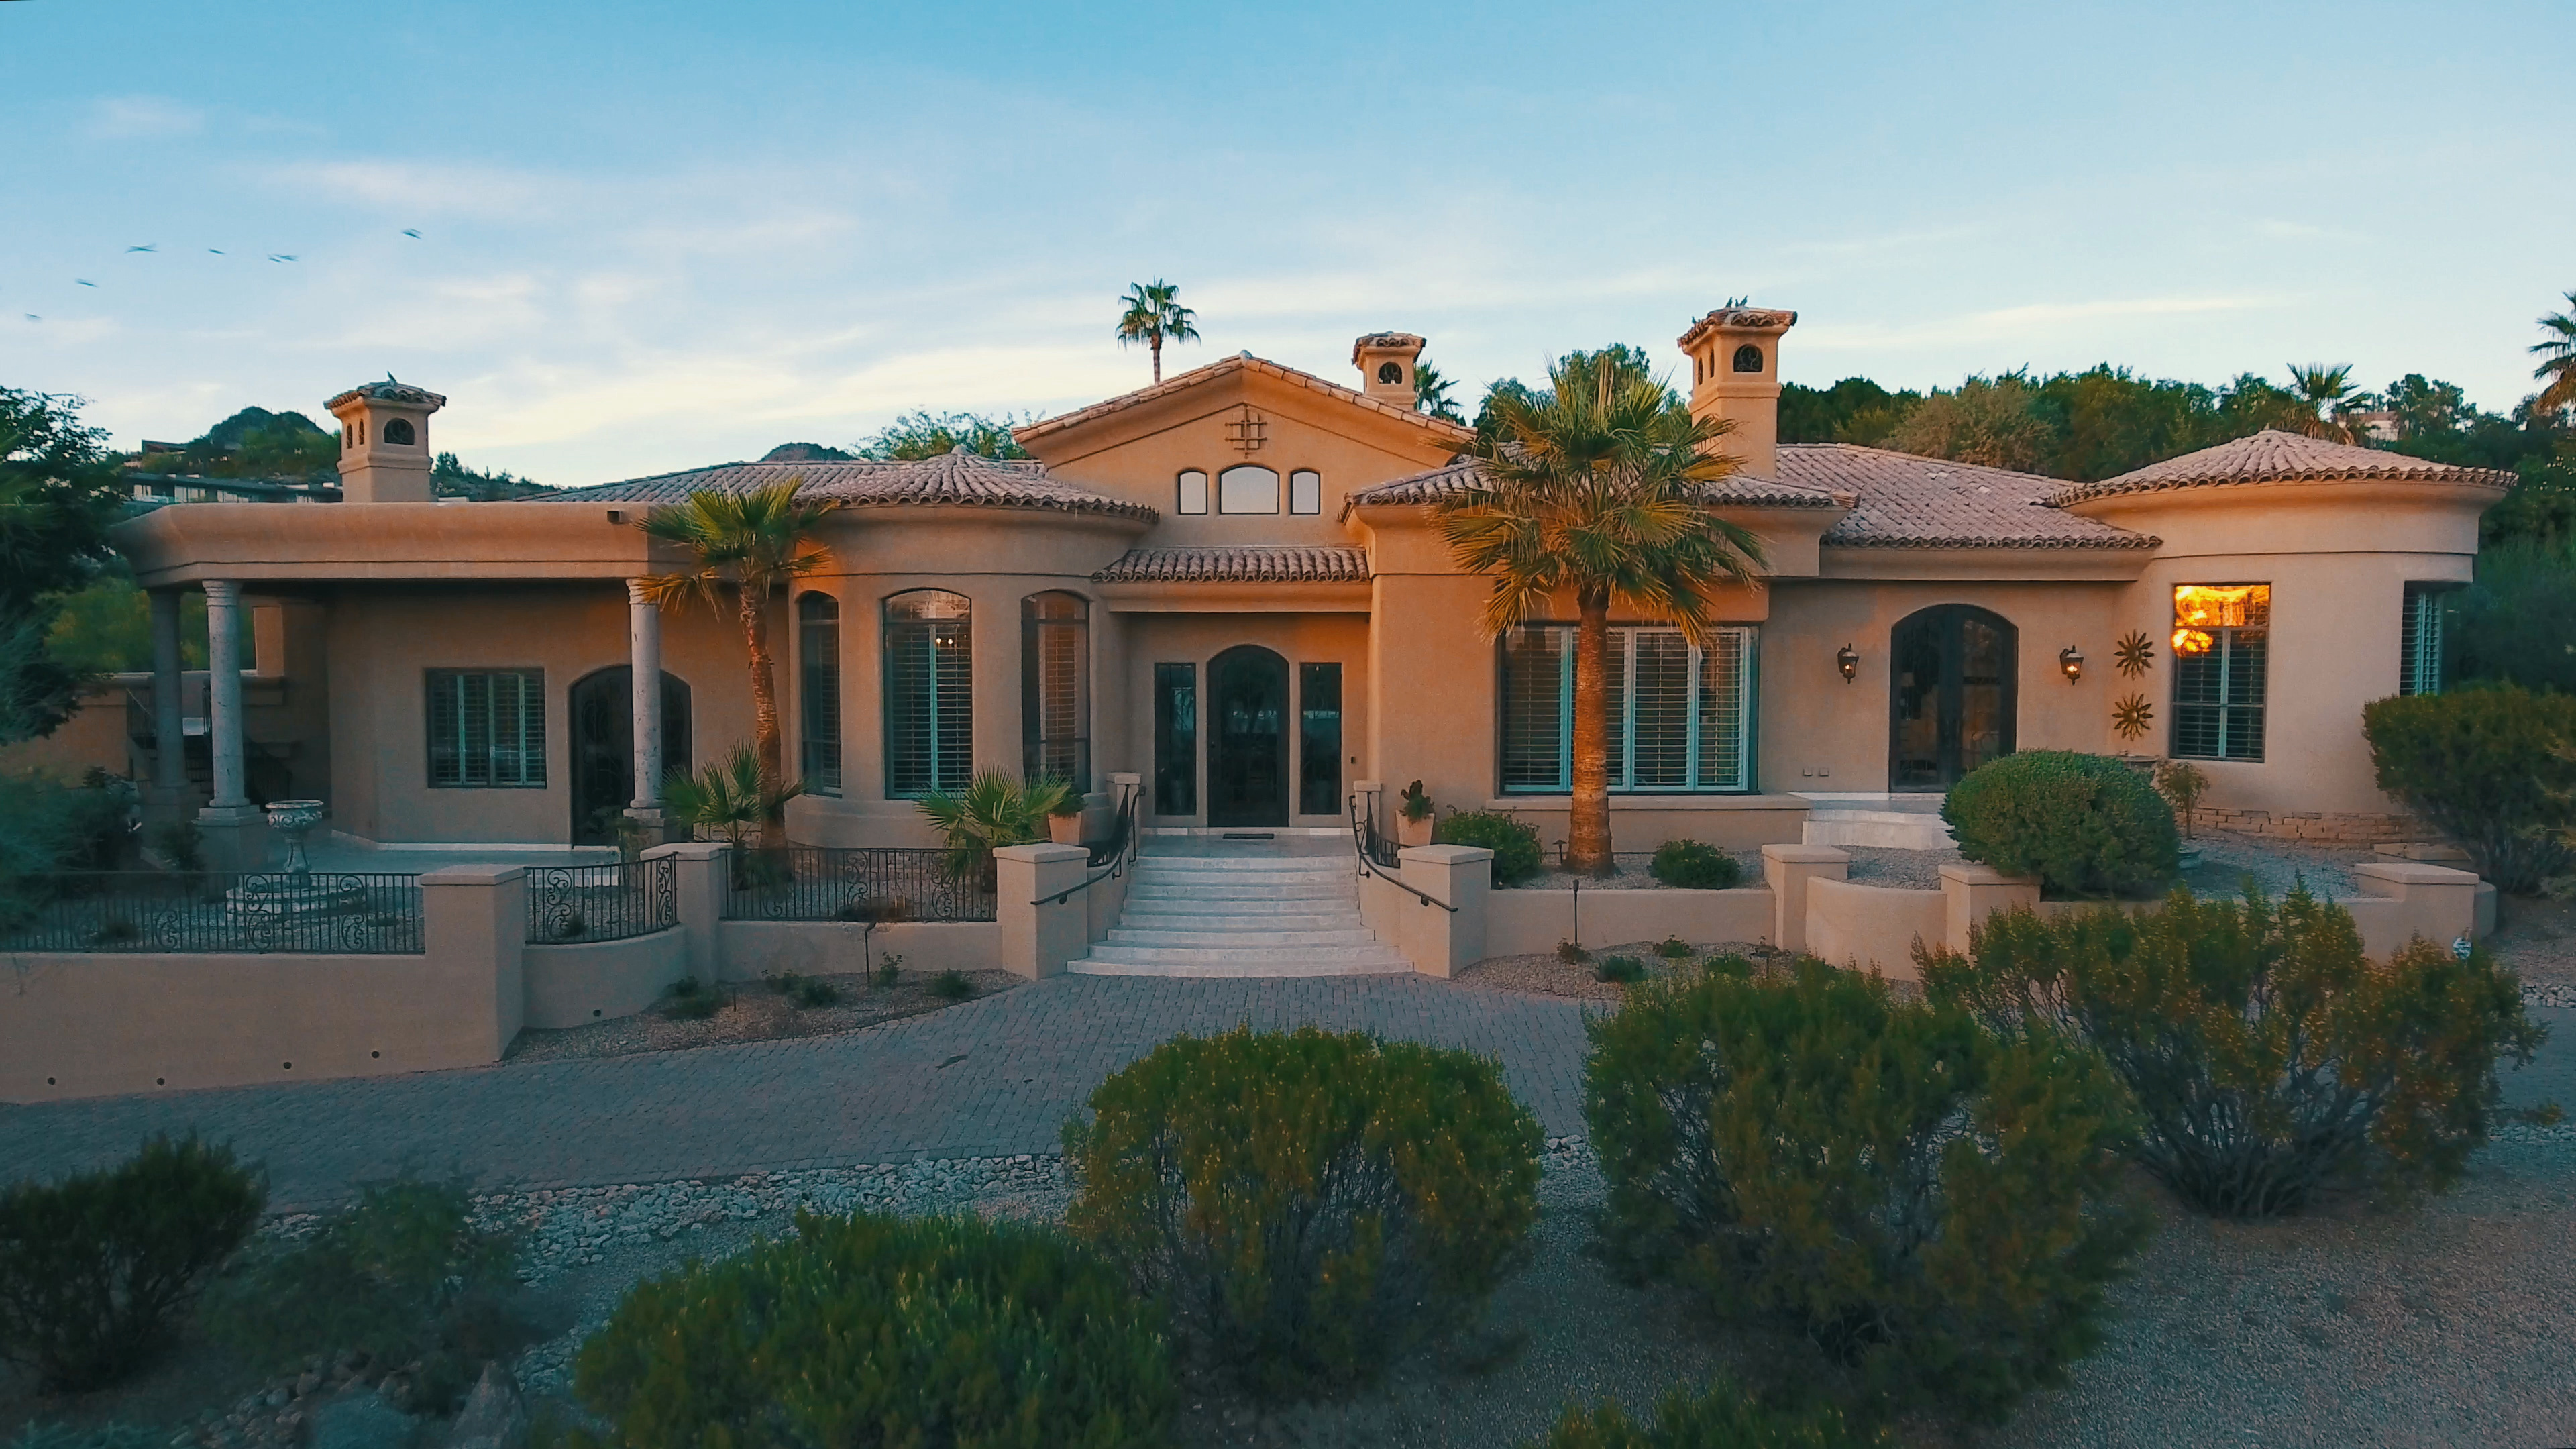 Mansion: Luxurious property in Florida, Private manor, Exclusive backyard. 3840x2160 4K Background.